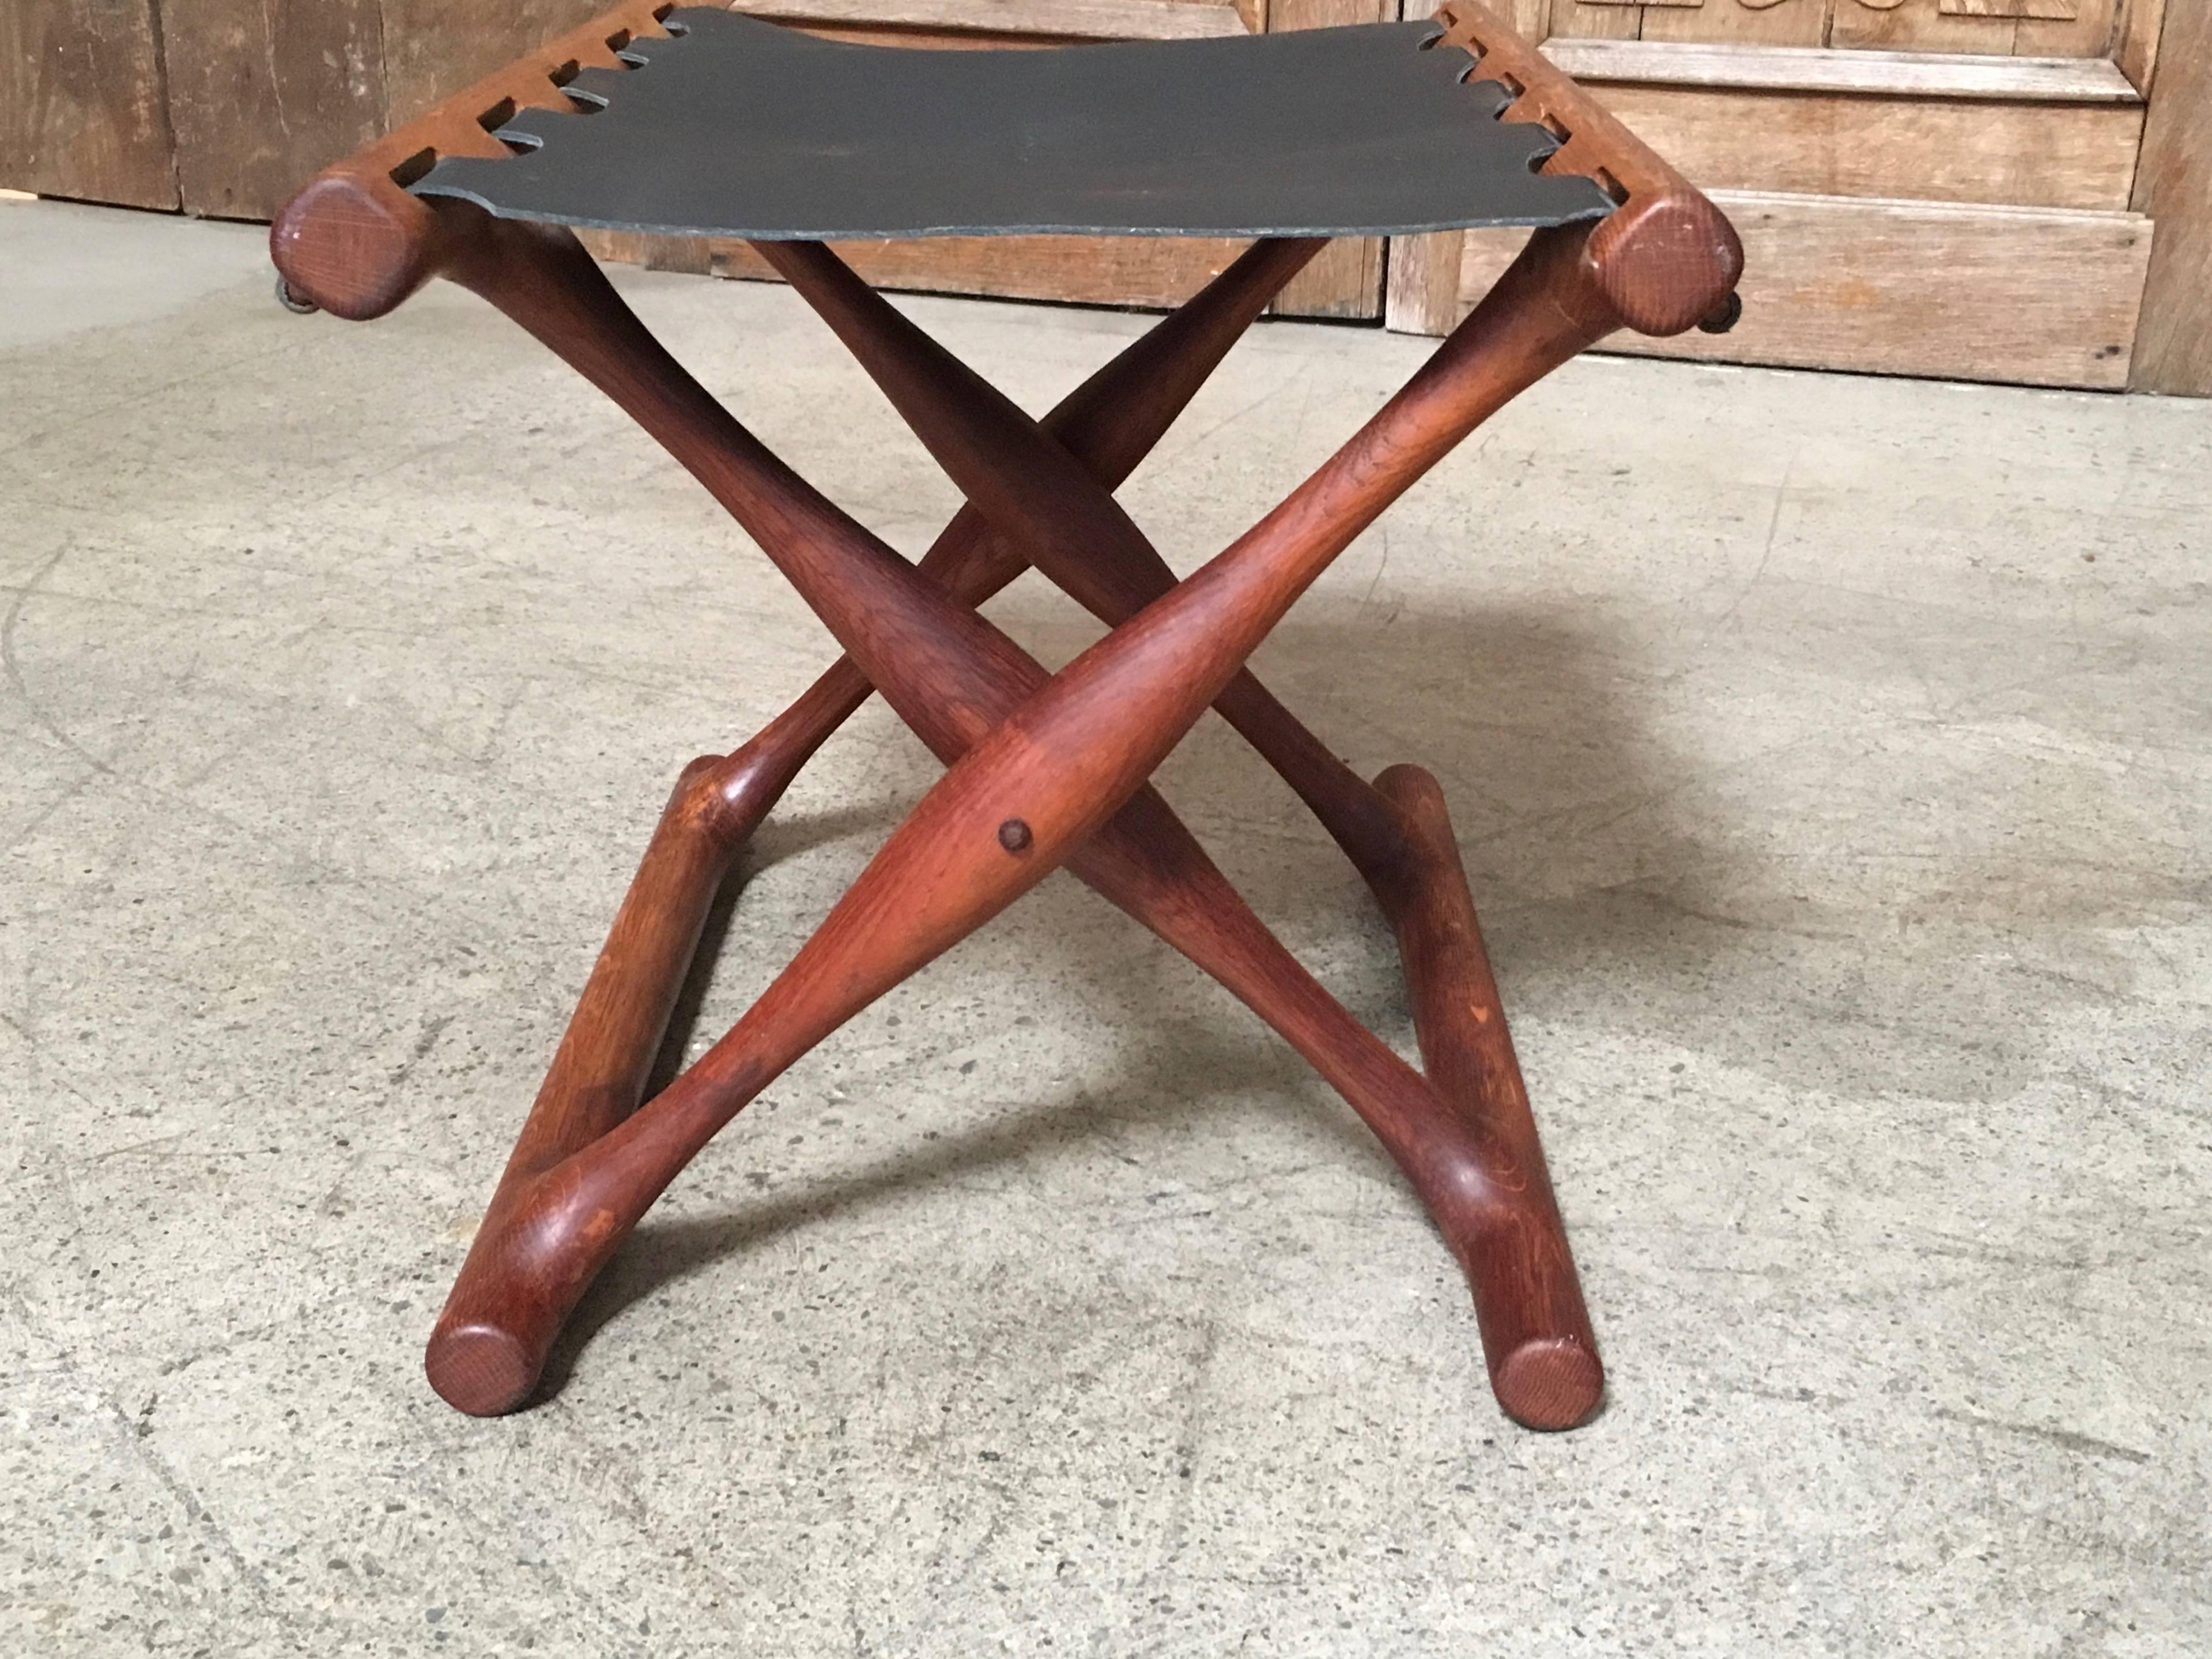 Teak and black leather folding stool designed by Poul Hundevad, circa 1950. The leather is not original.